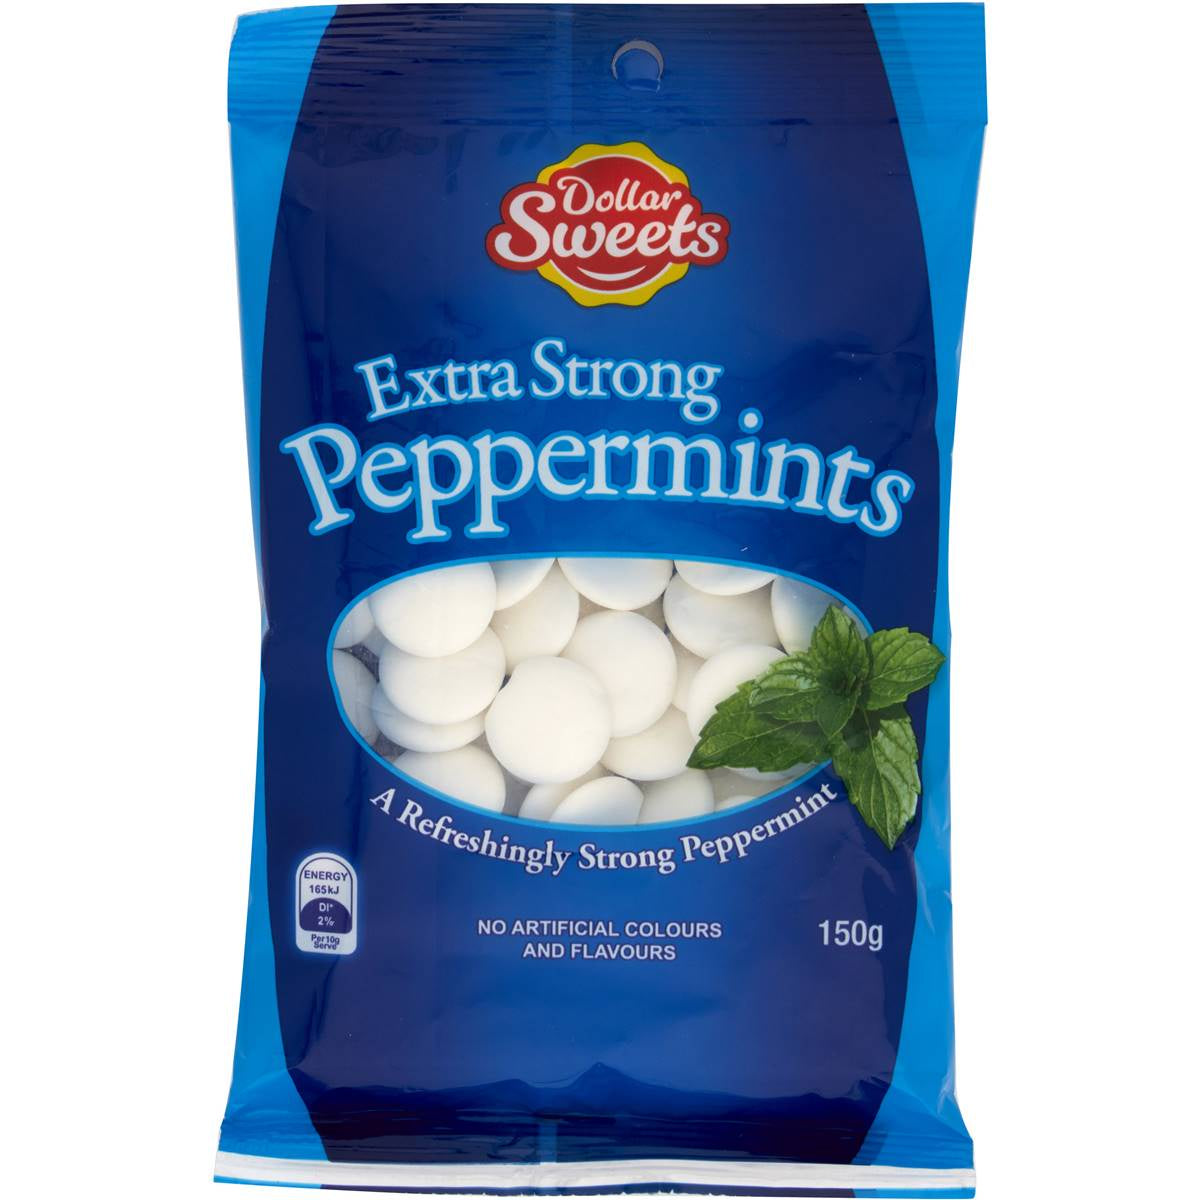 Dollar Sweets Extra Strong Peppermint 150g